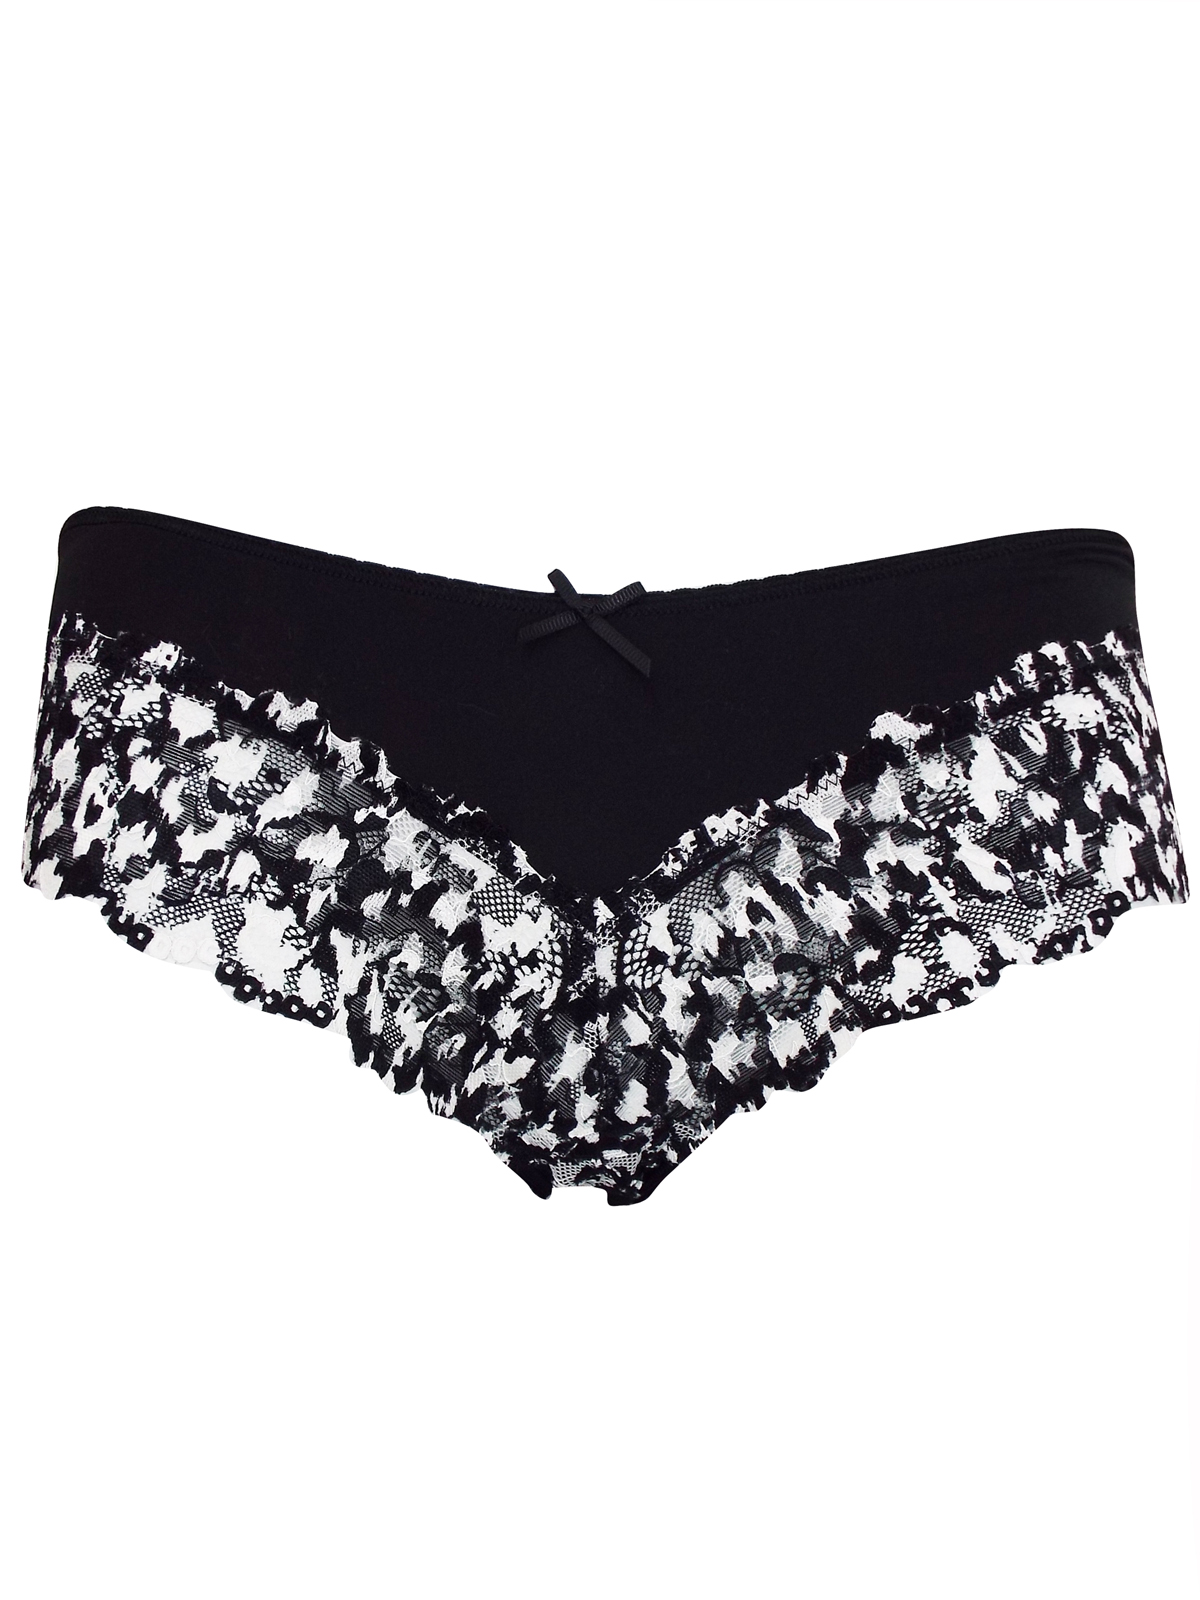 Marks and Spencer - - M&5 GREY Isabella Floral Lace Brazilian Knickers ...